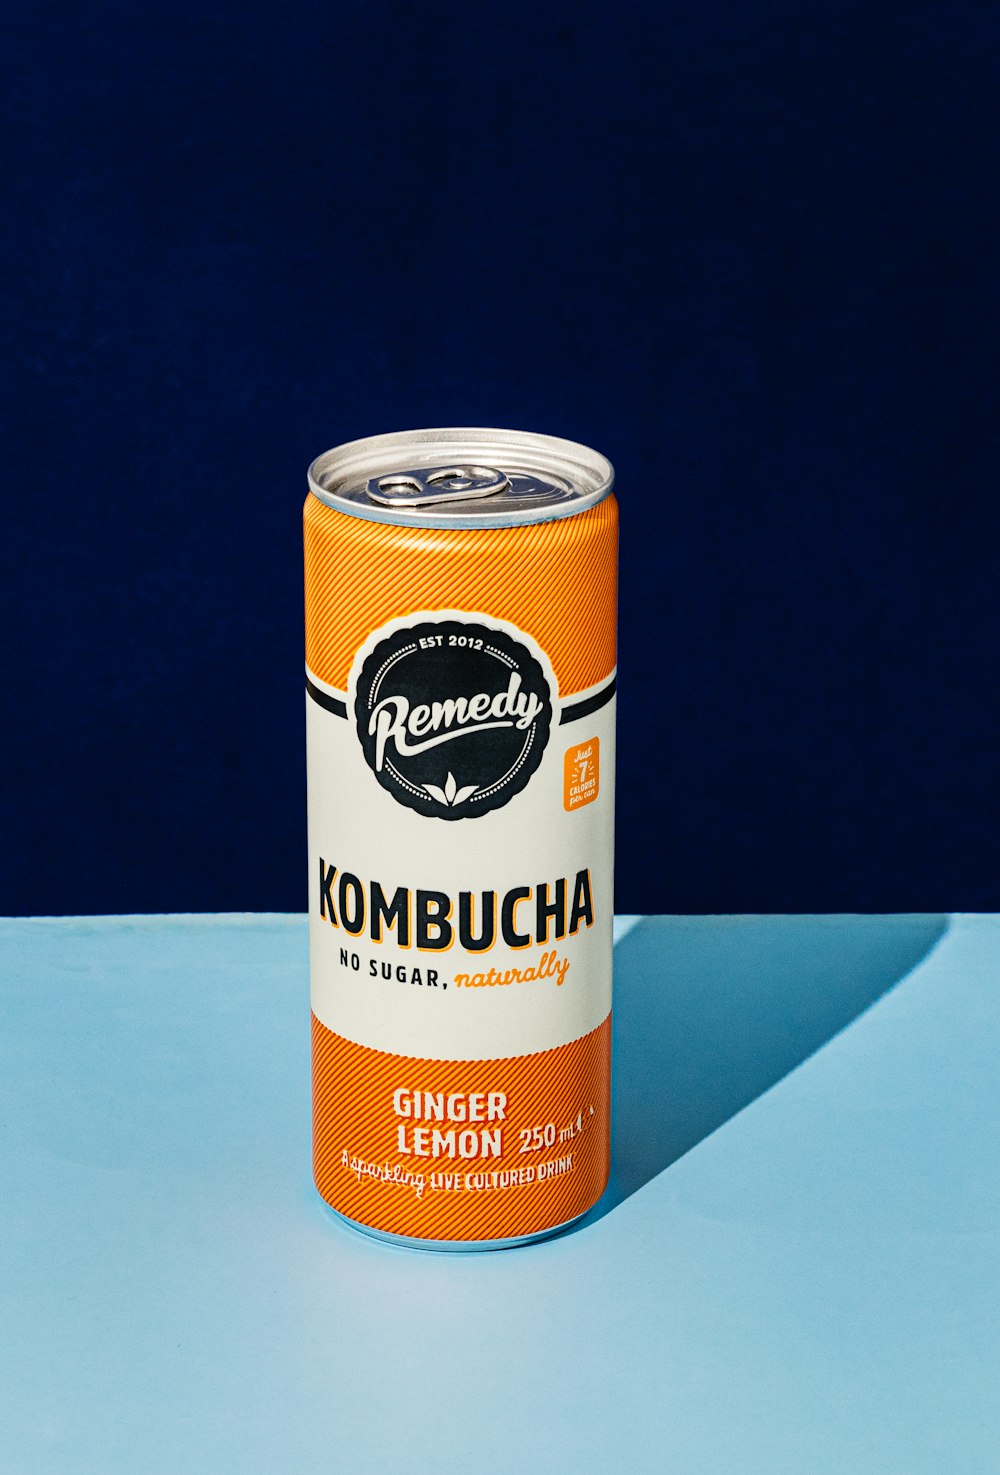 a can of kombucha on a blue surface